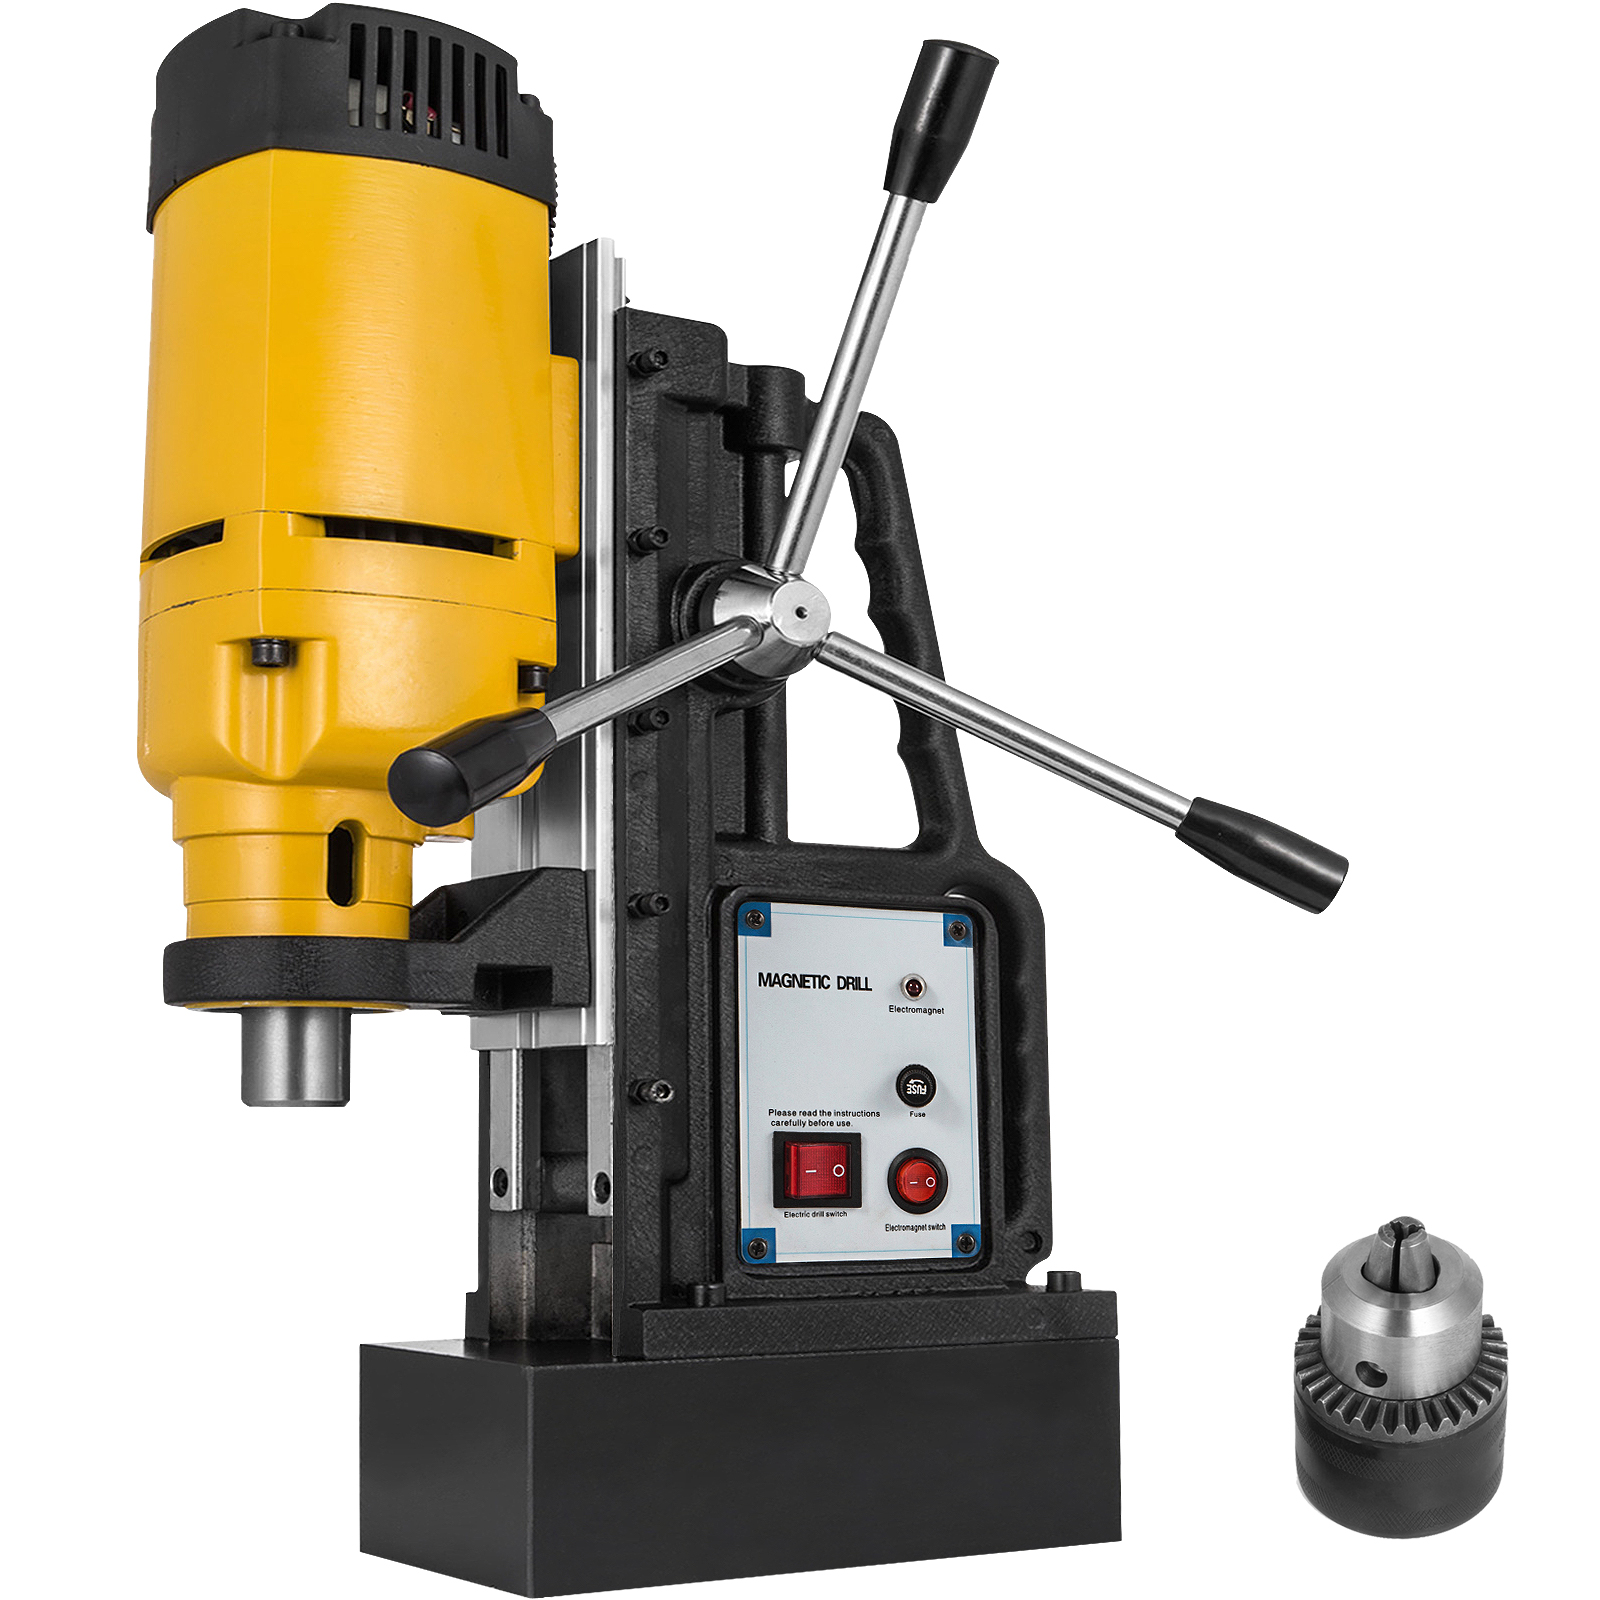 1200w Mb-23 Magnetic Base Drill Press 23mm Boring 13500n Magnet Force Tapping от Vevor Many GEOs